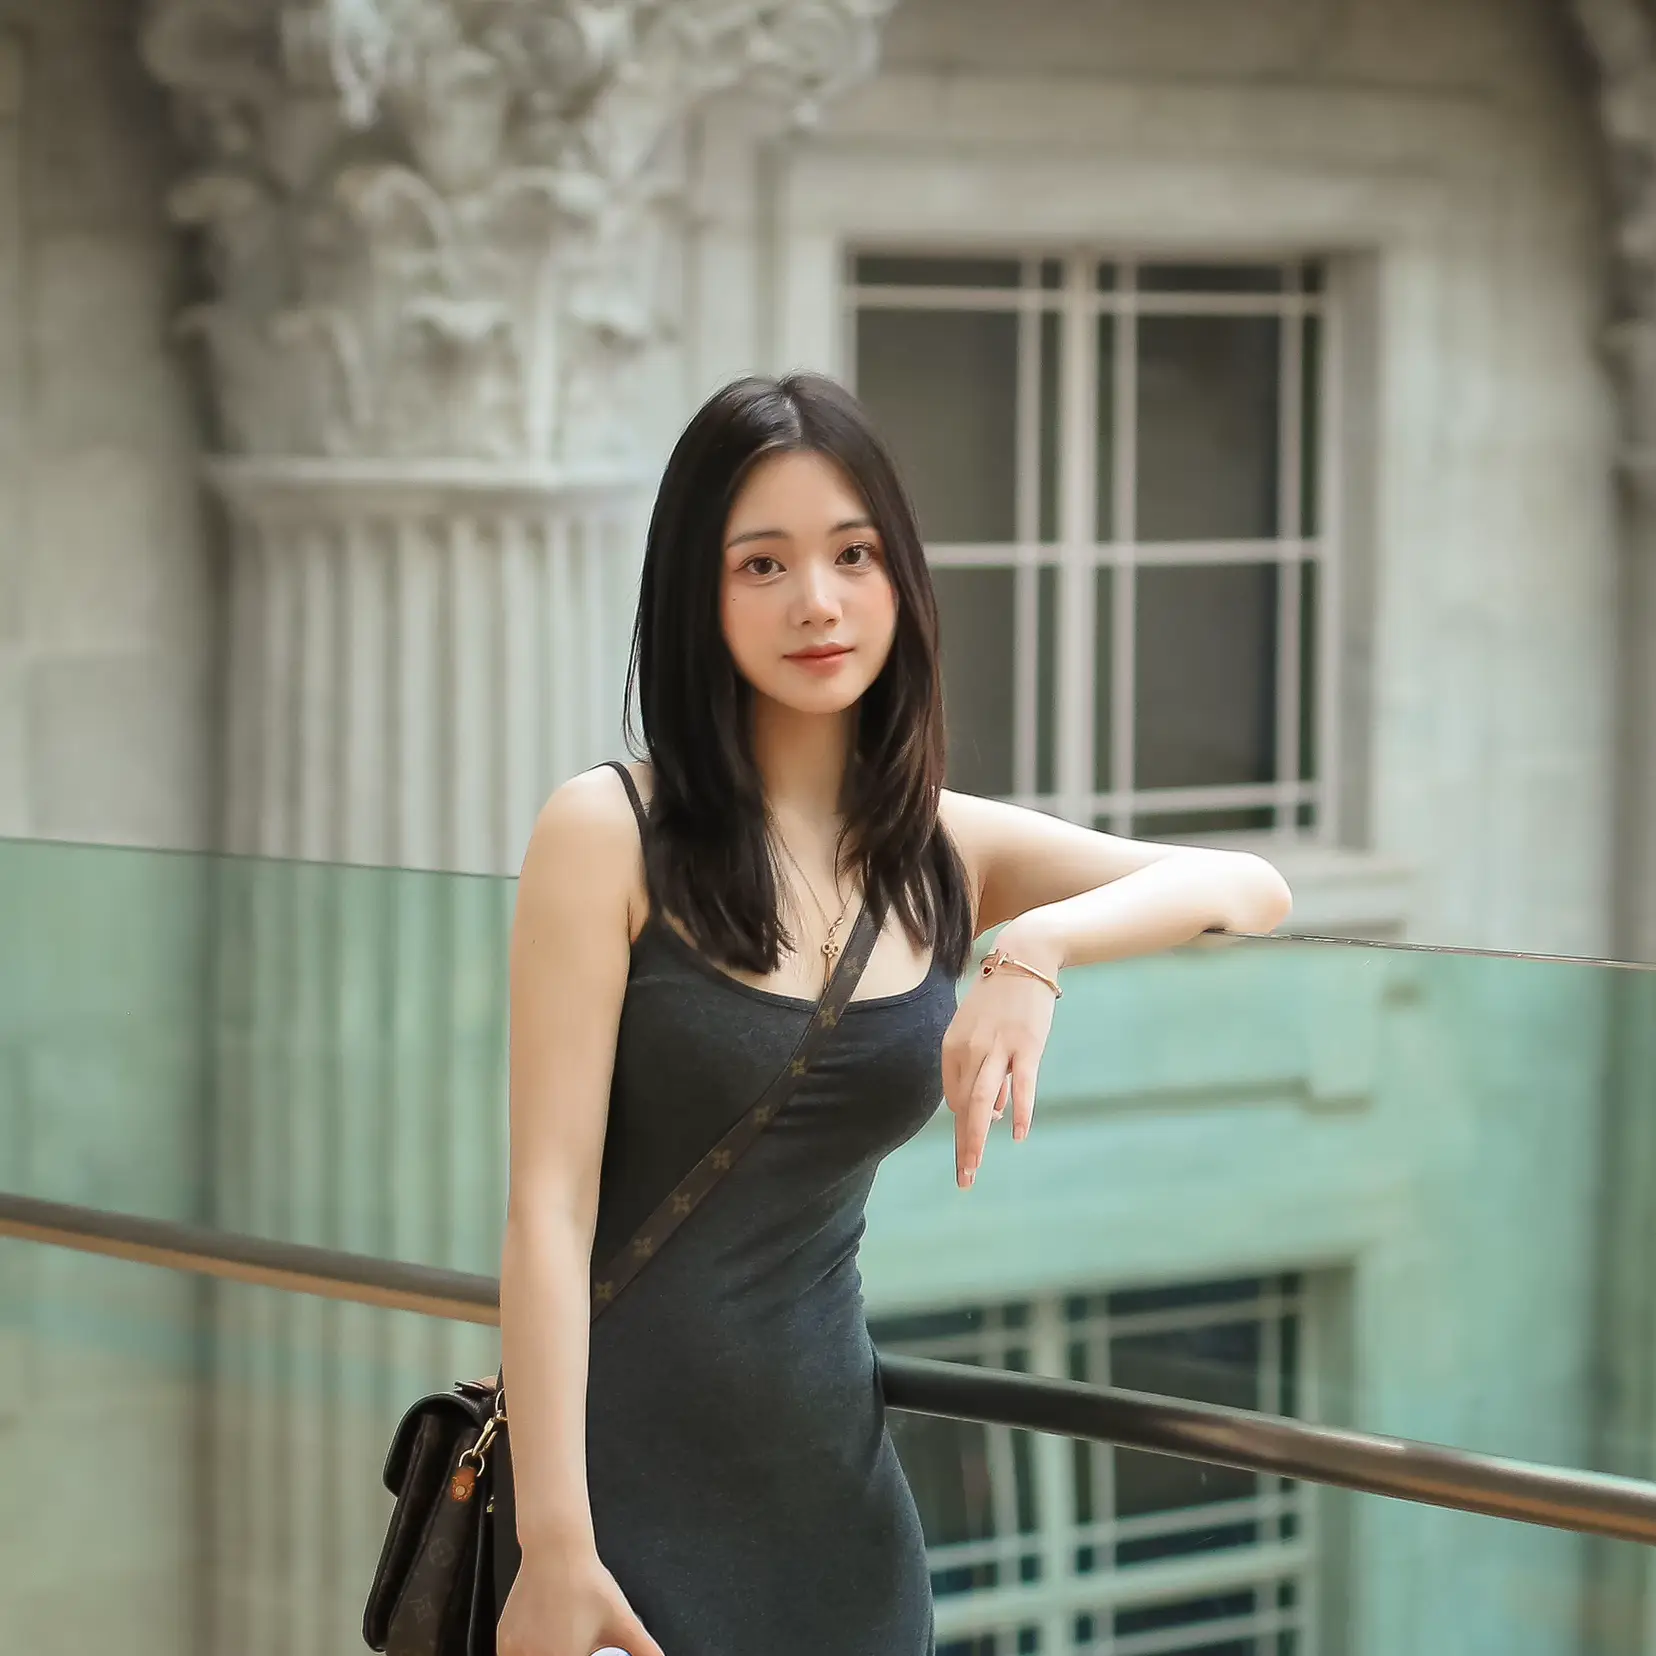 Photoshoot Spot You Must Visit - National Gallery's images(5)